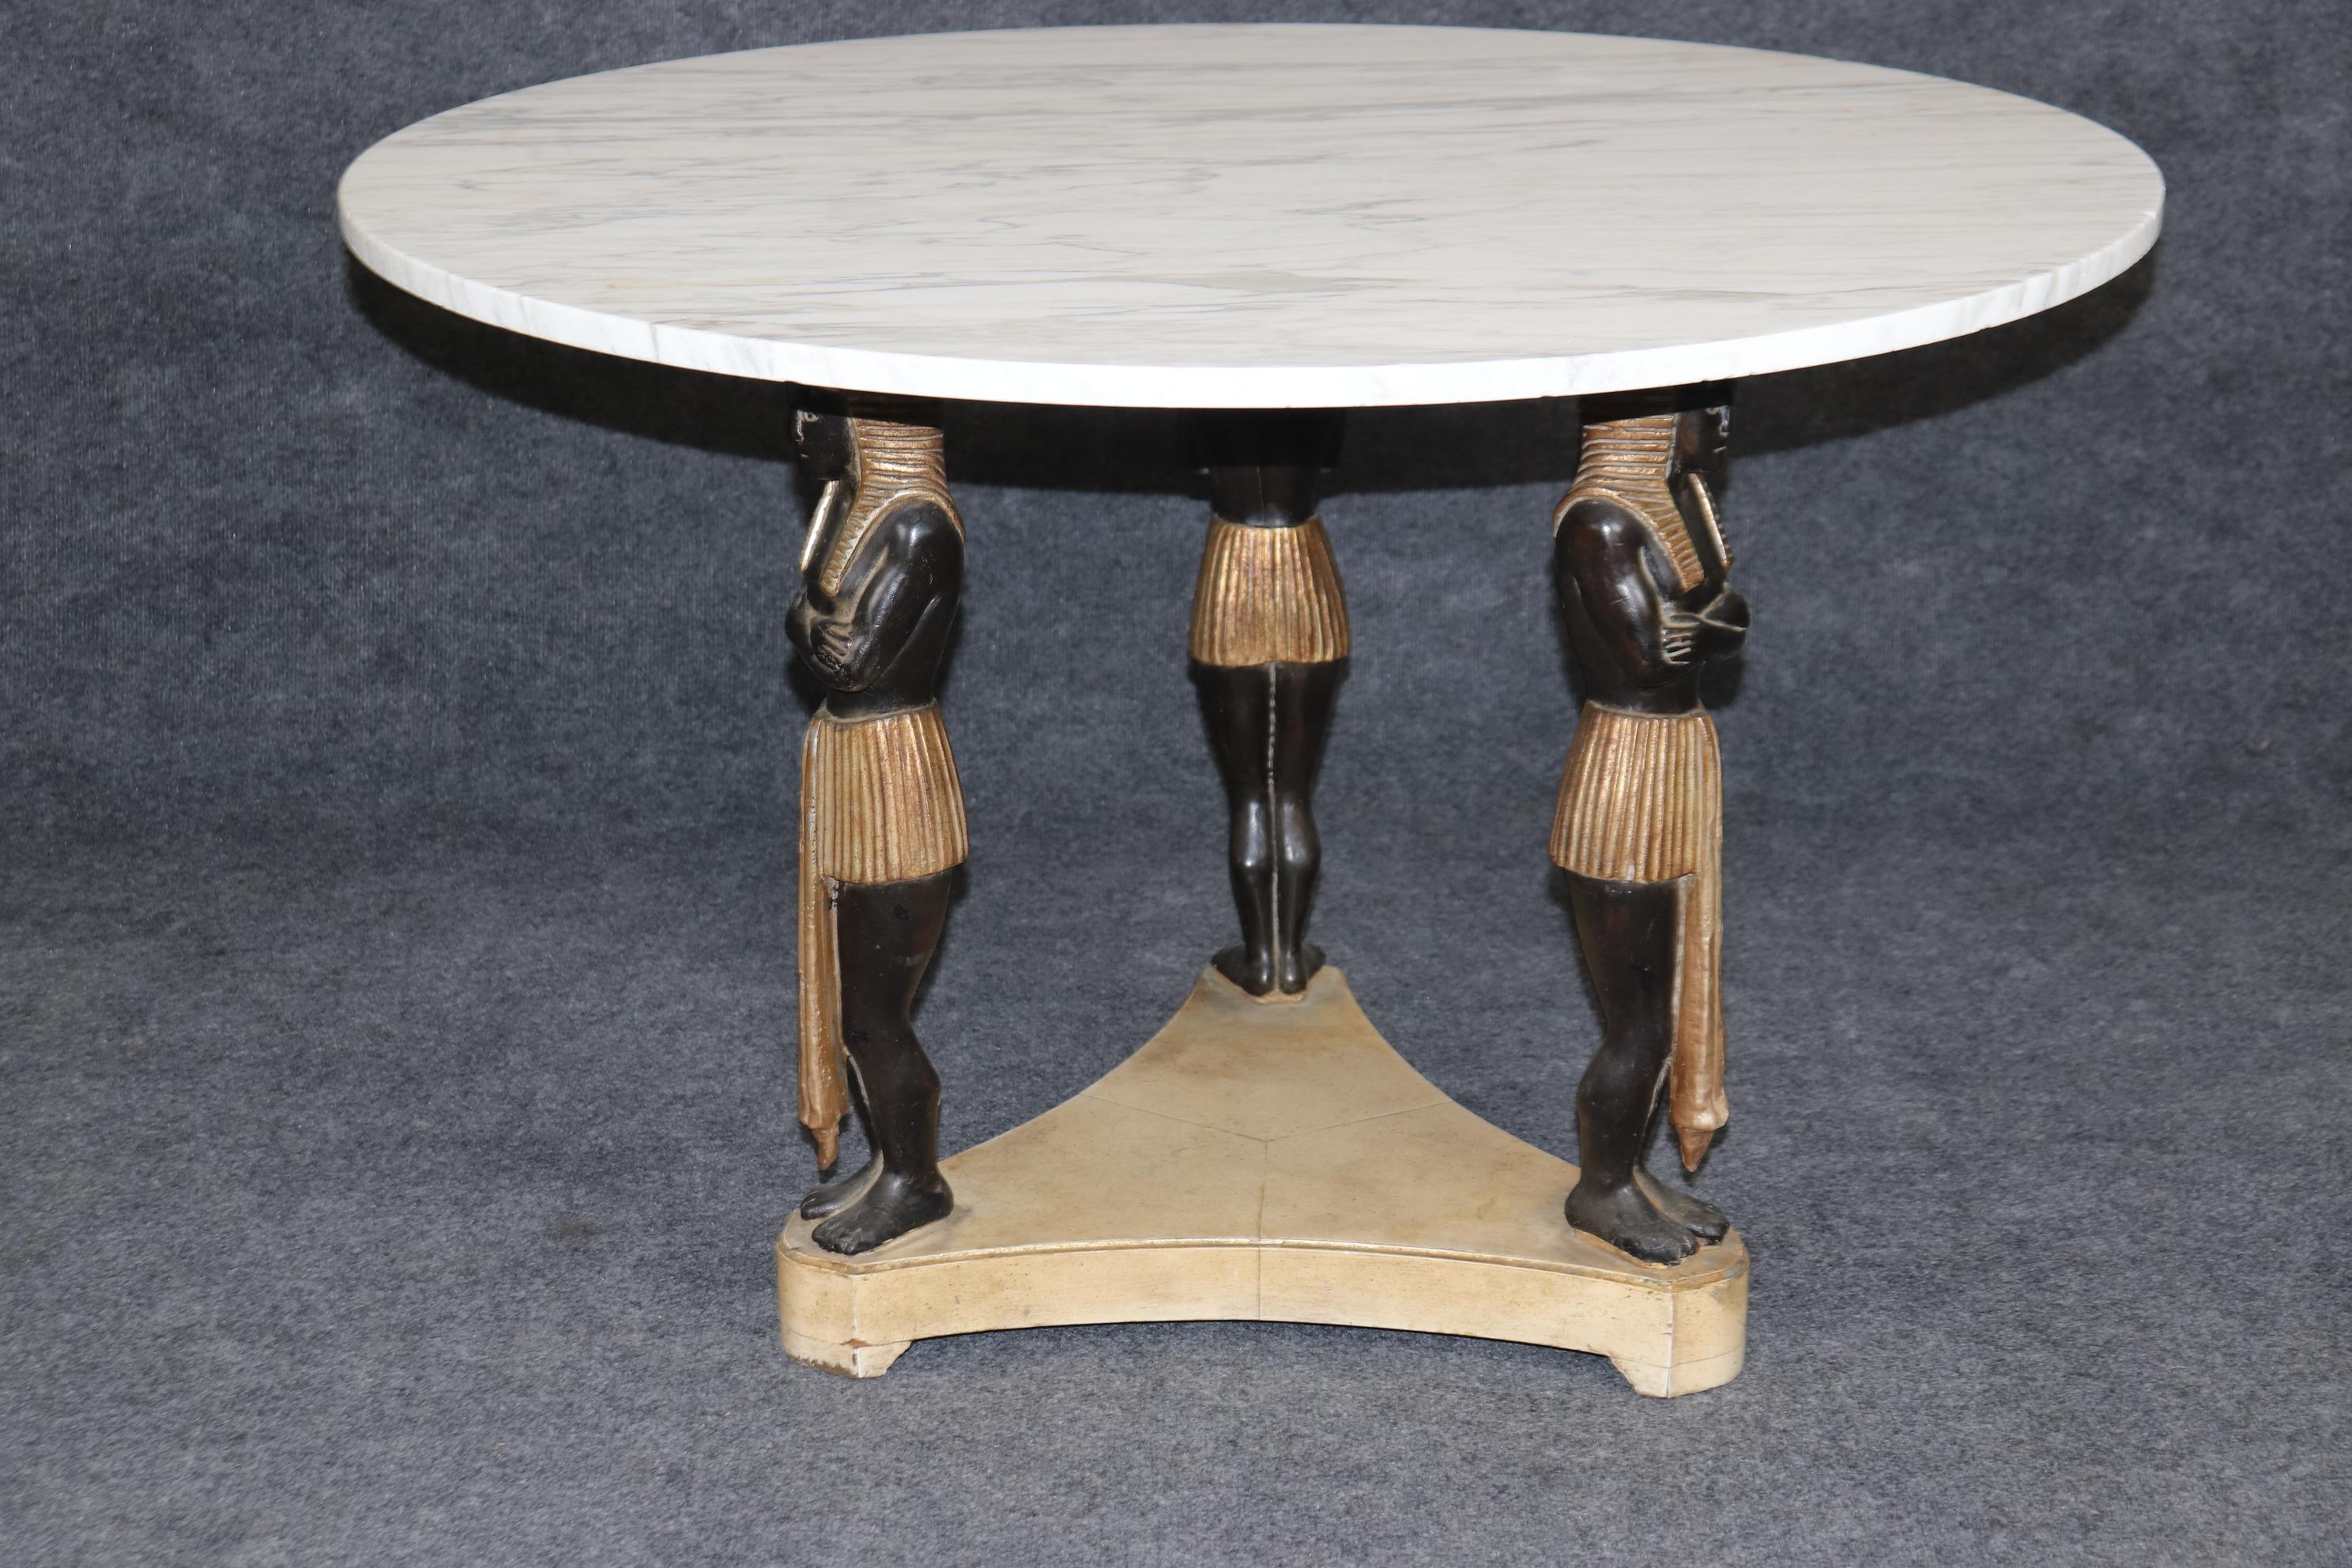 Dimensions: Height: 27 in Width: 40 in Depth: 40 in 
This vintage French Empire style carved figural marble top coffee table/center table is of the highest quality! If you look at the photos provided, you can see the attention to detail in the